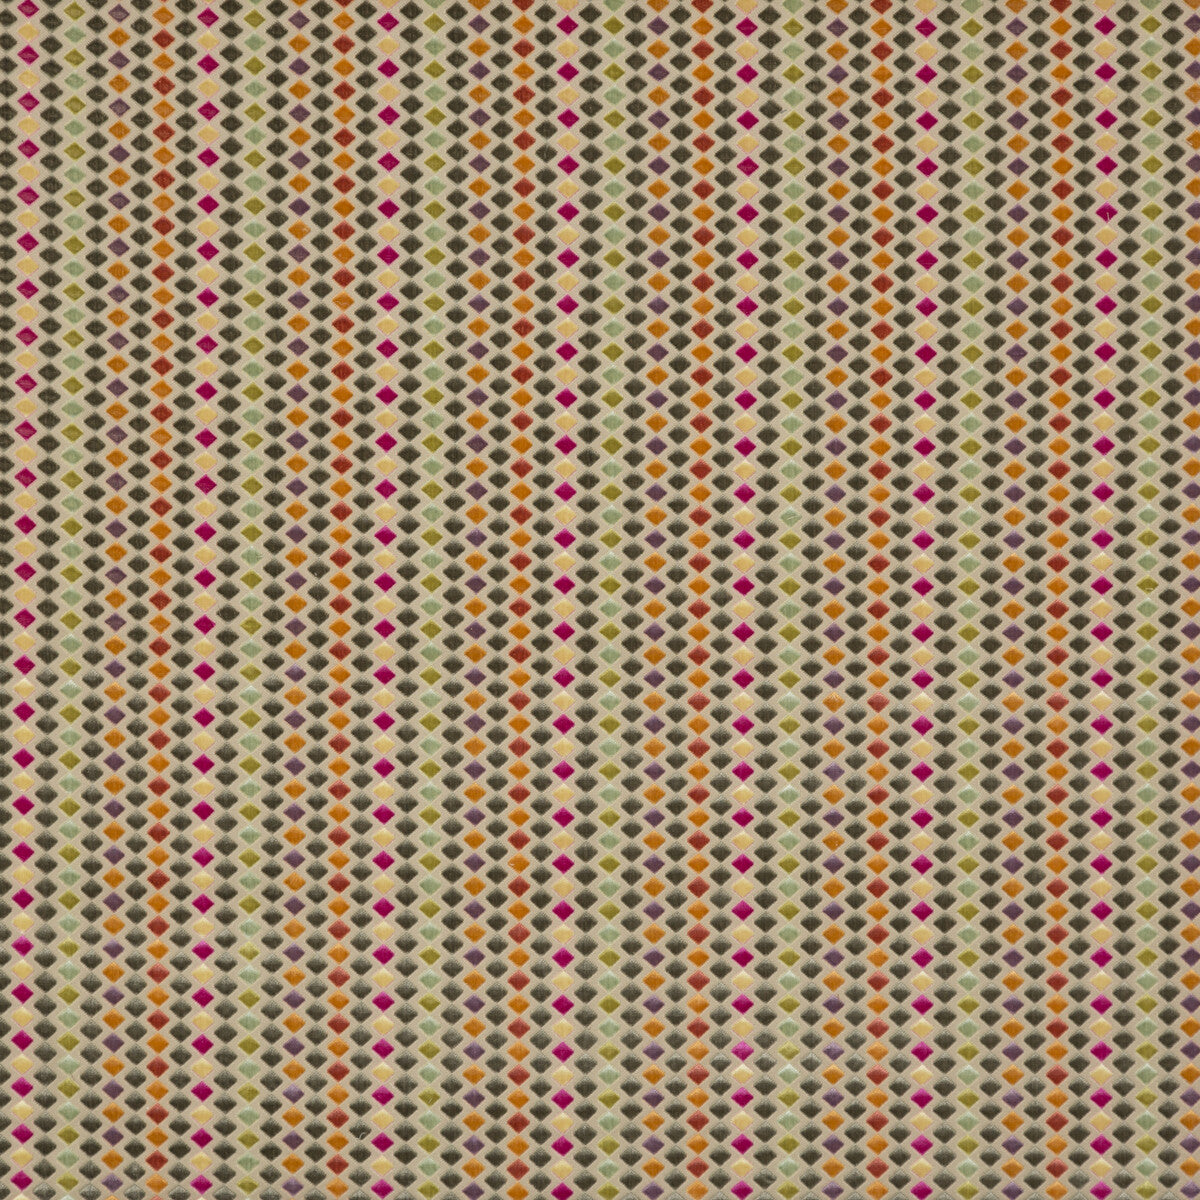 Clarendon Diamonds fabric in multi color - pattern BF10595.1.0 - by G P &amp; J Baker in the Cosmopolitan collection